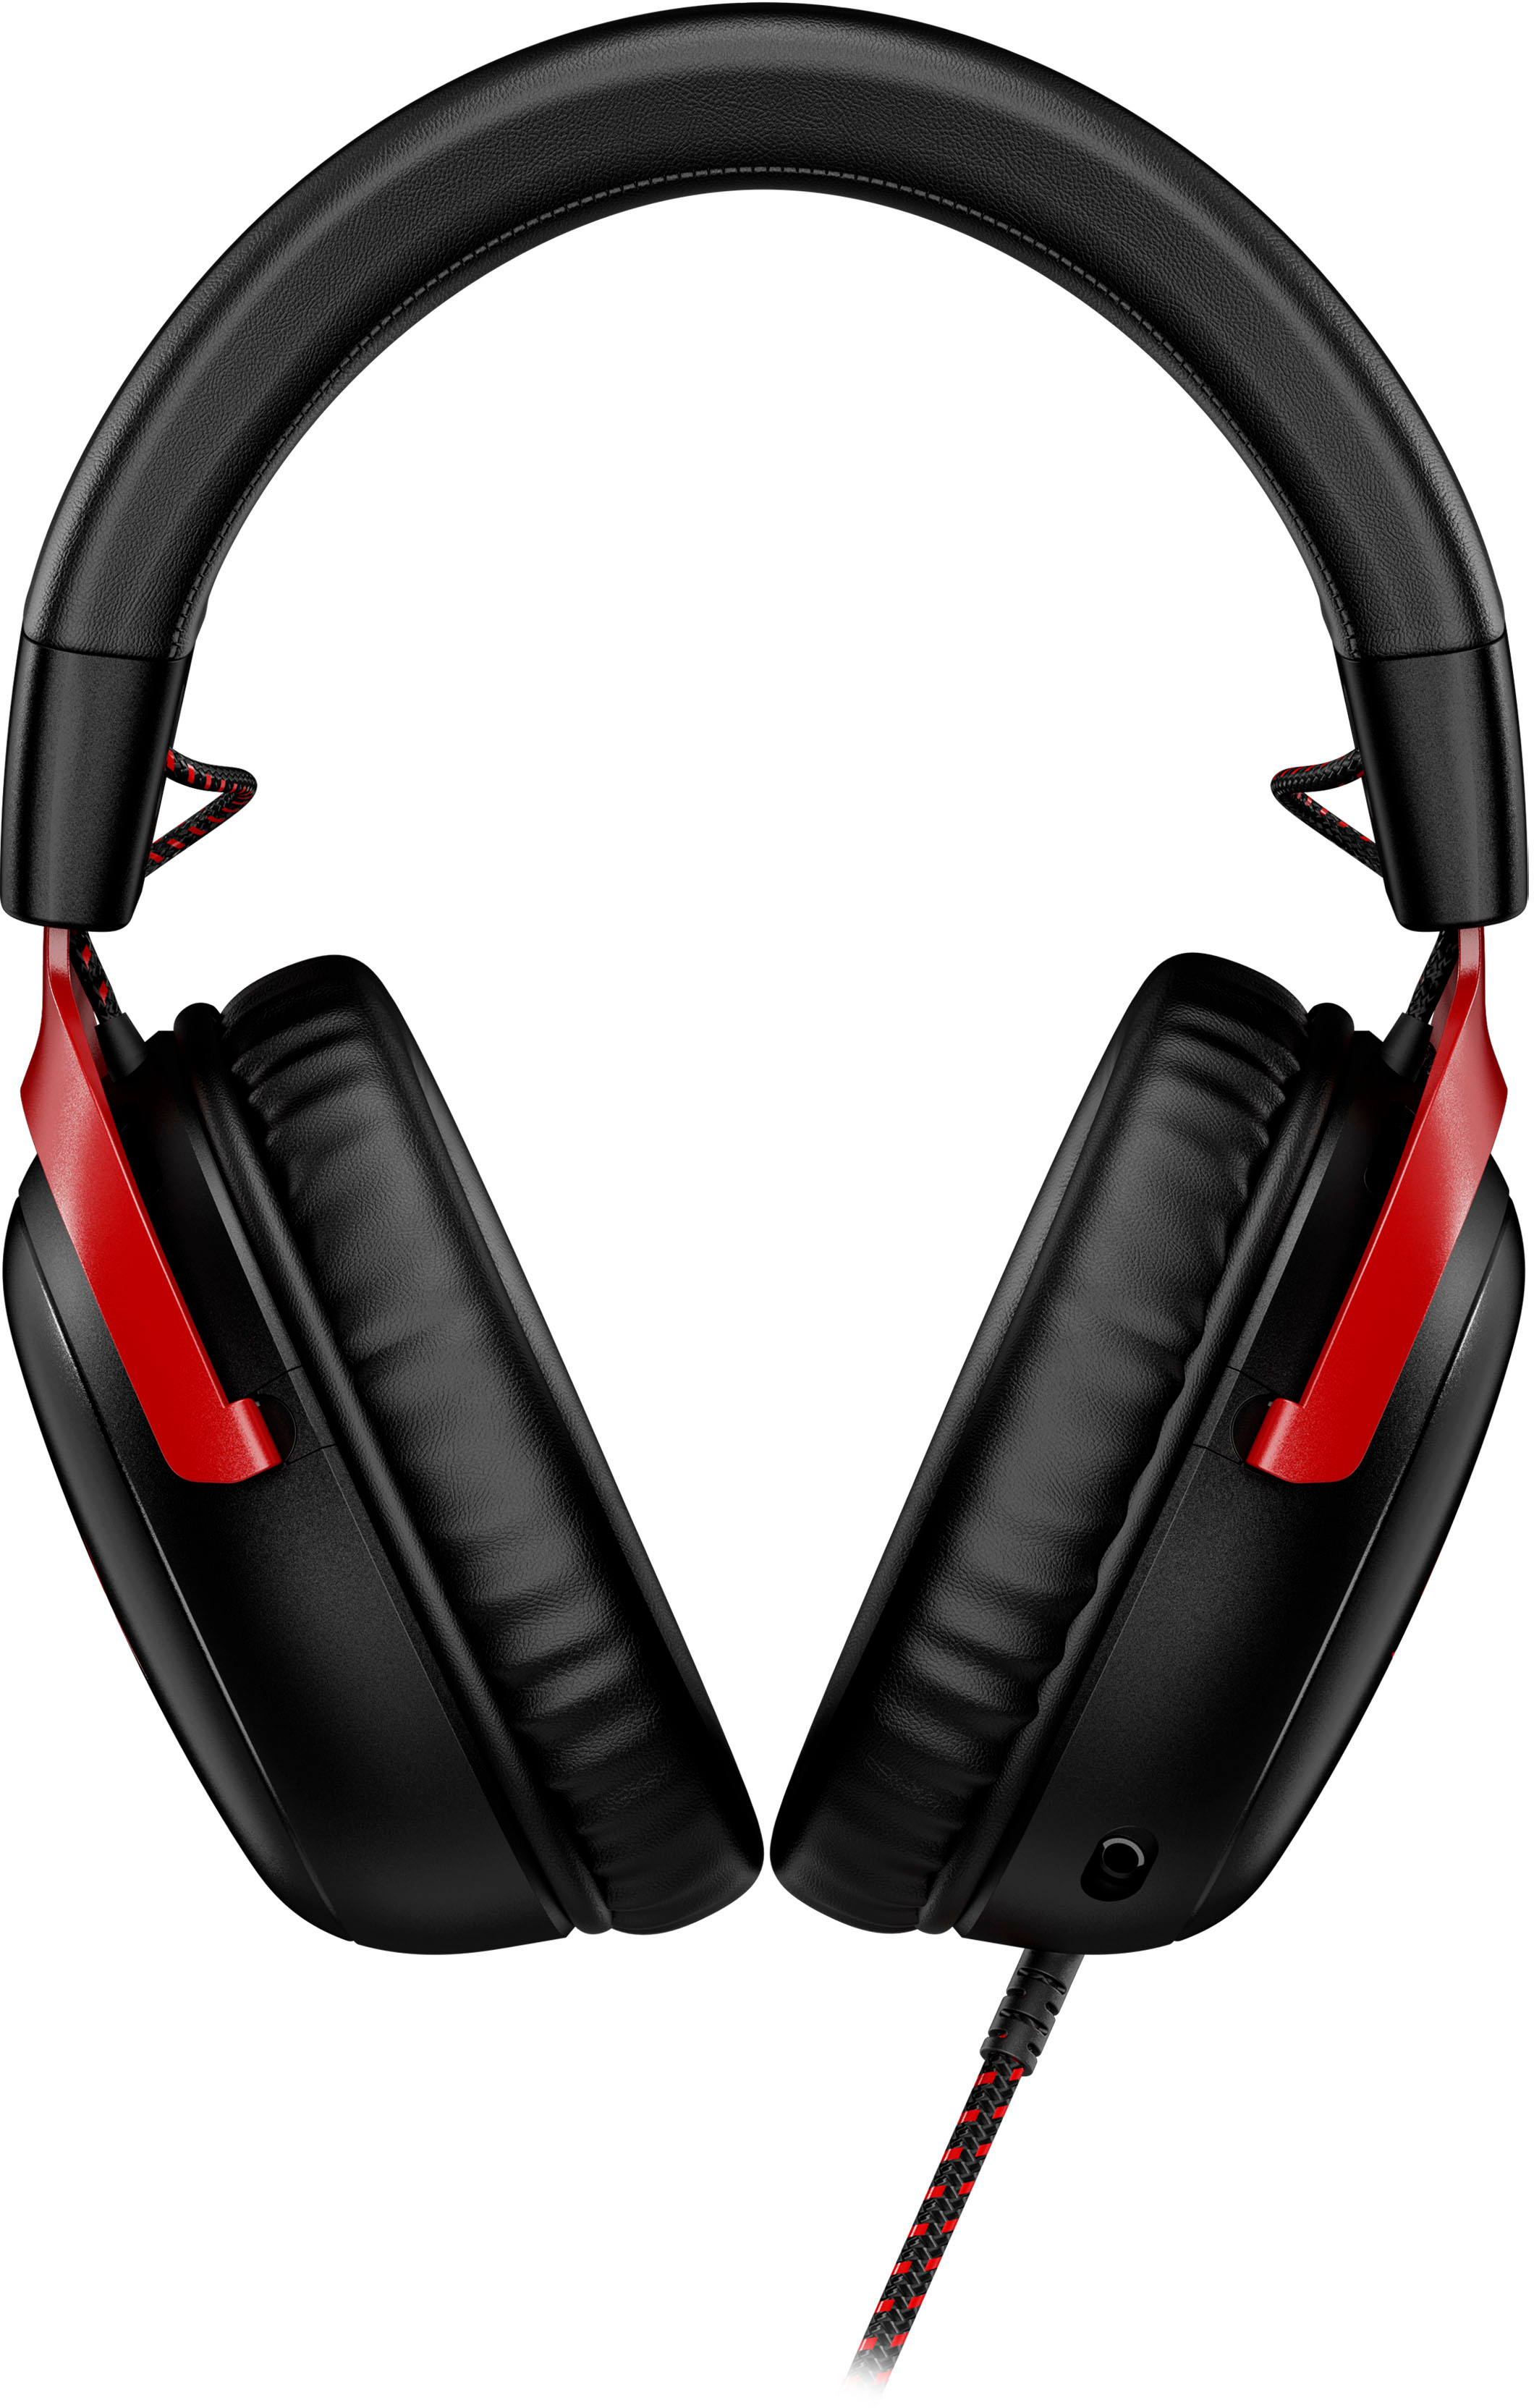  HyperX Cloud Gaming Headset for PC, Xbox One¹, PS4